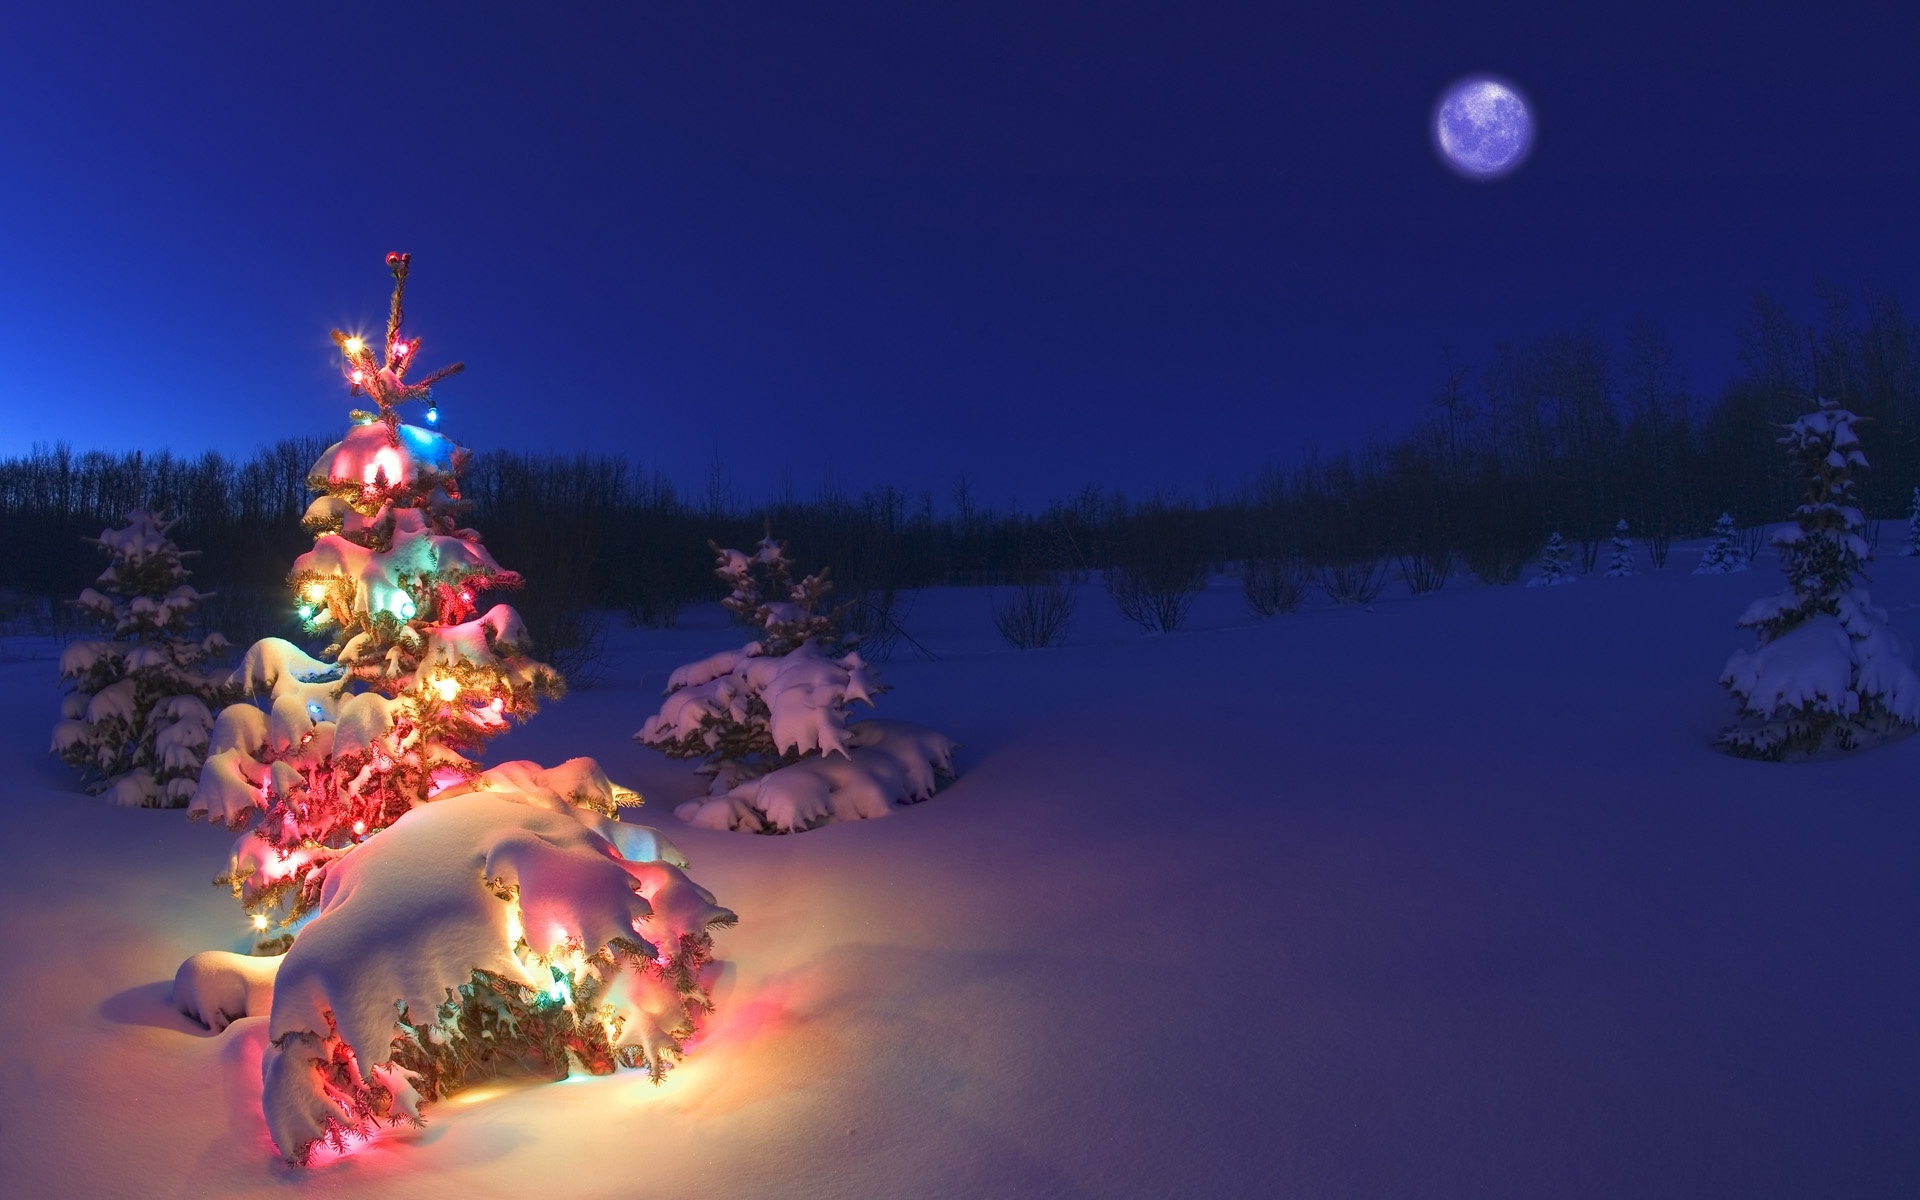 Free Download Christmas Tree Light In Snow Hd Wallpaper Stylish Hd Wallpapers 19x10 For Your Desktop Mobile Tablet Explore 71 Snowy Christmas Backgrounds Snowy Christmas Wallpaper Computer Desktop Wallpaper